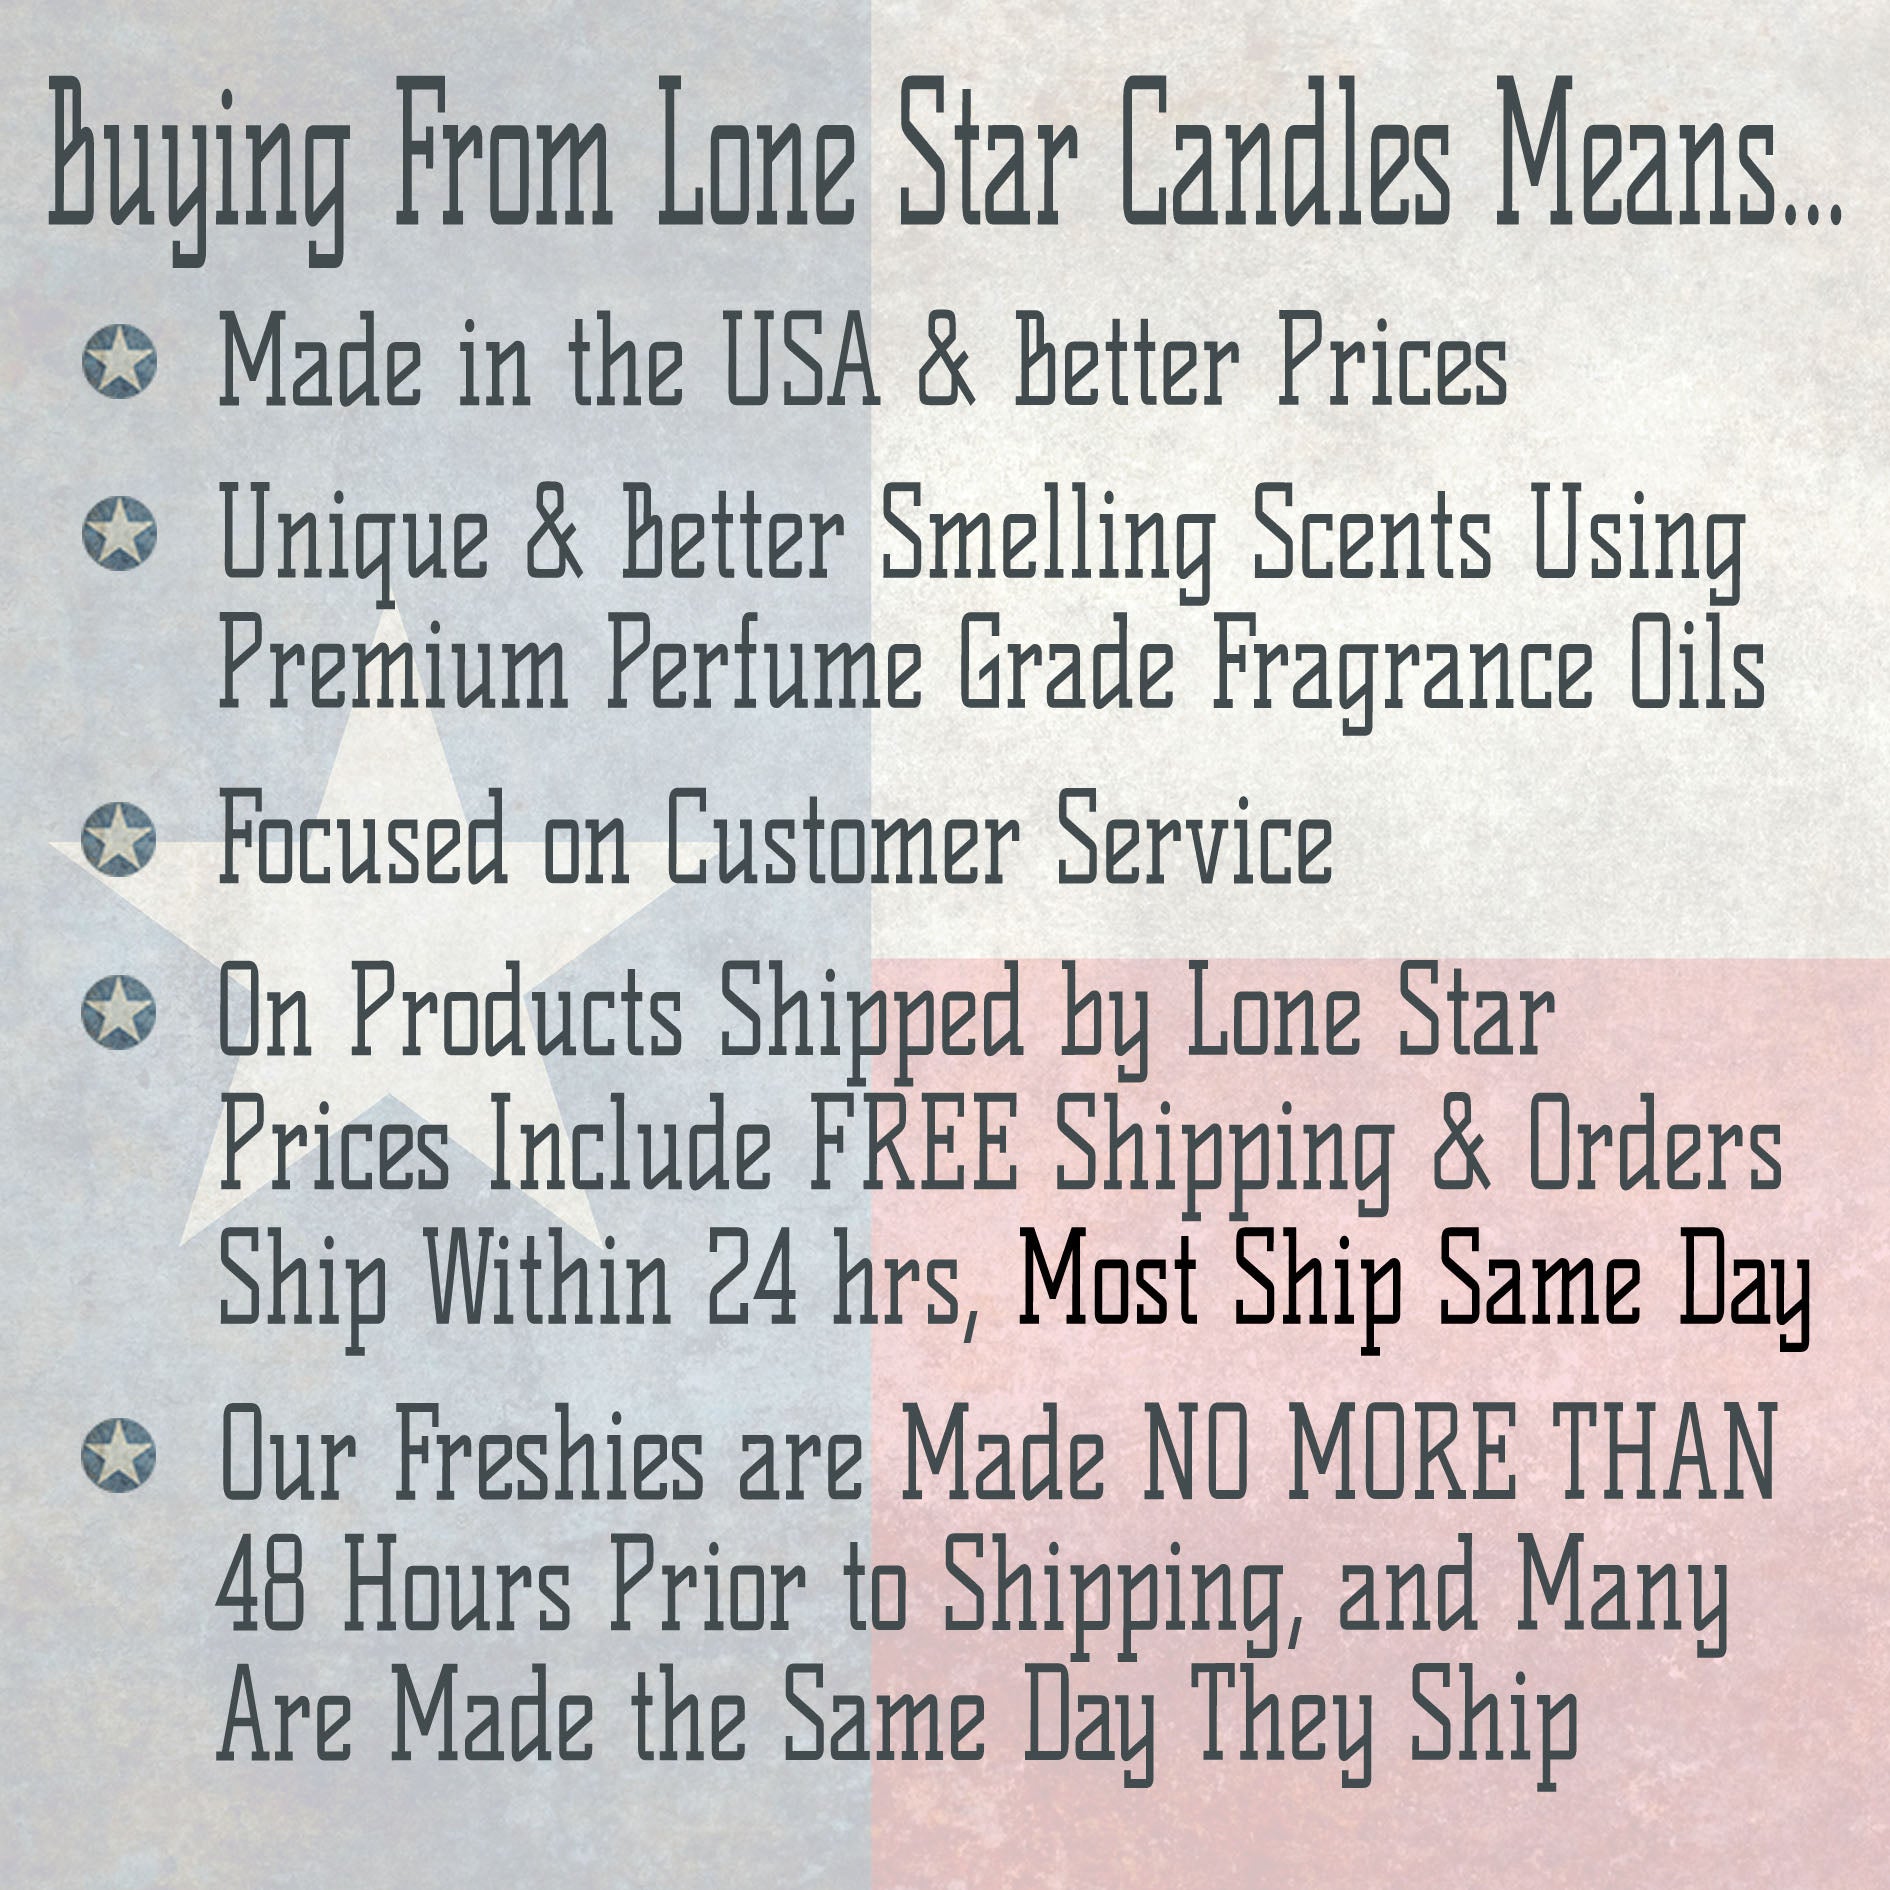 Strawberry Leather, Lone Star Candles & More's Premium Strongly Scented Freshies, Genuine Leather Aroma with Sweet & Juicy Strawberries, Car & Air Freshener, USA & Texas Made, Truck & Pumpkin 1-Pack